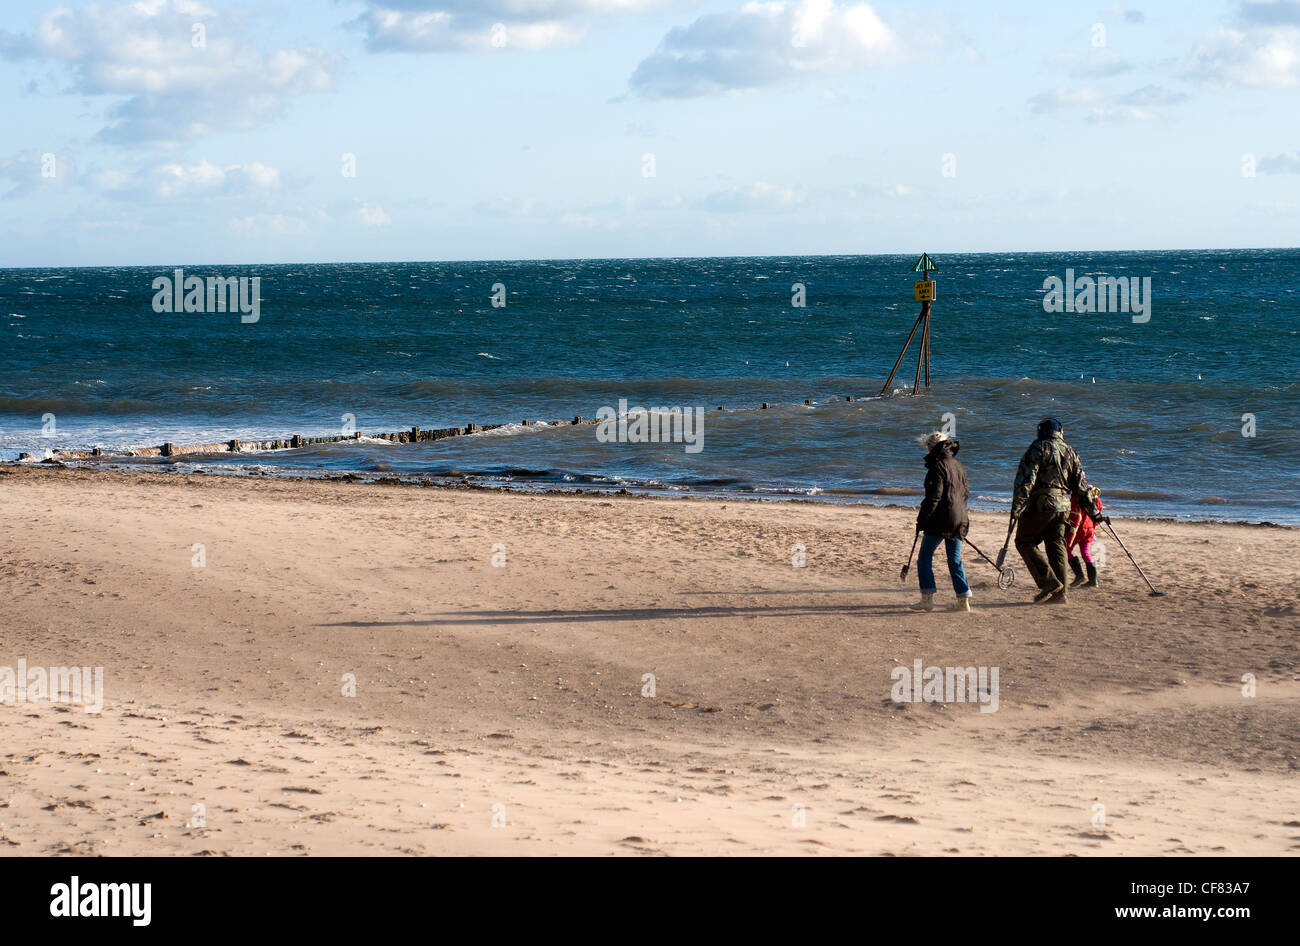 metal detecting on Exmouth beach,Exmouth beach,Devon,Coastline,coast, poor water quality 2012,surfers against sewage,bathing res Stock Photo